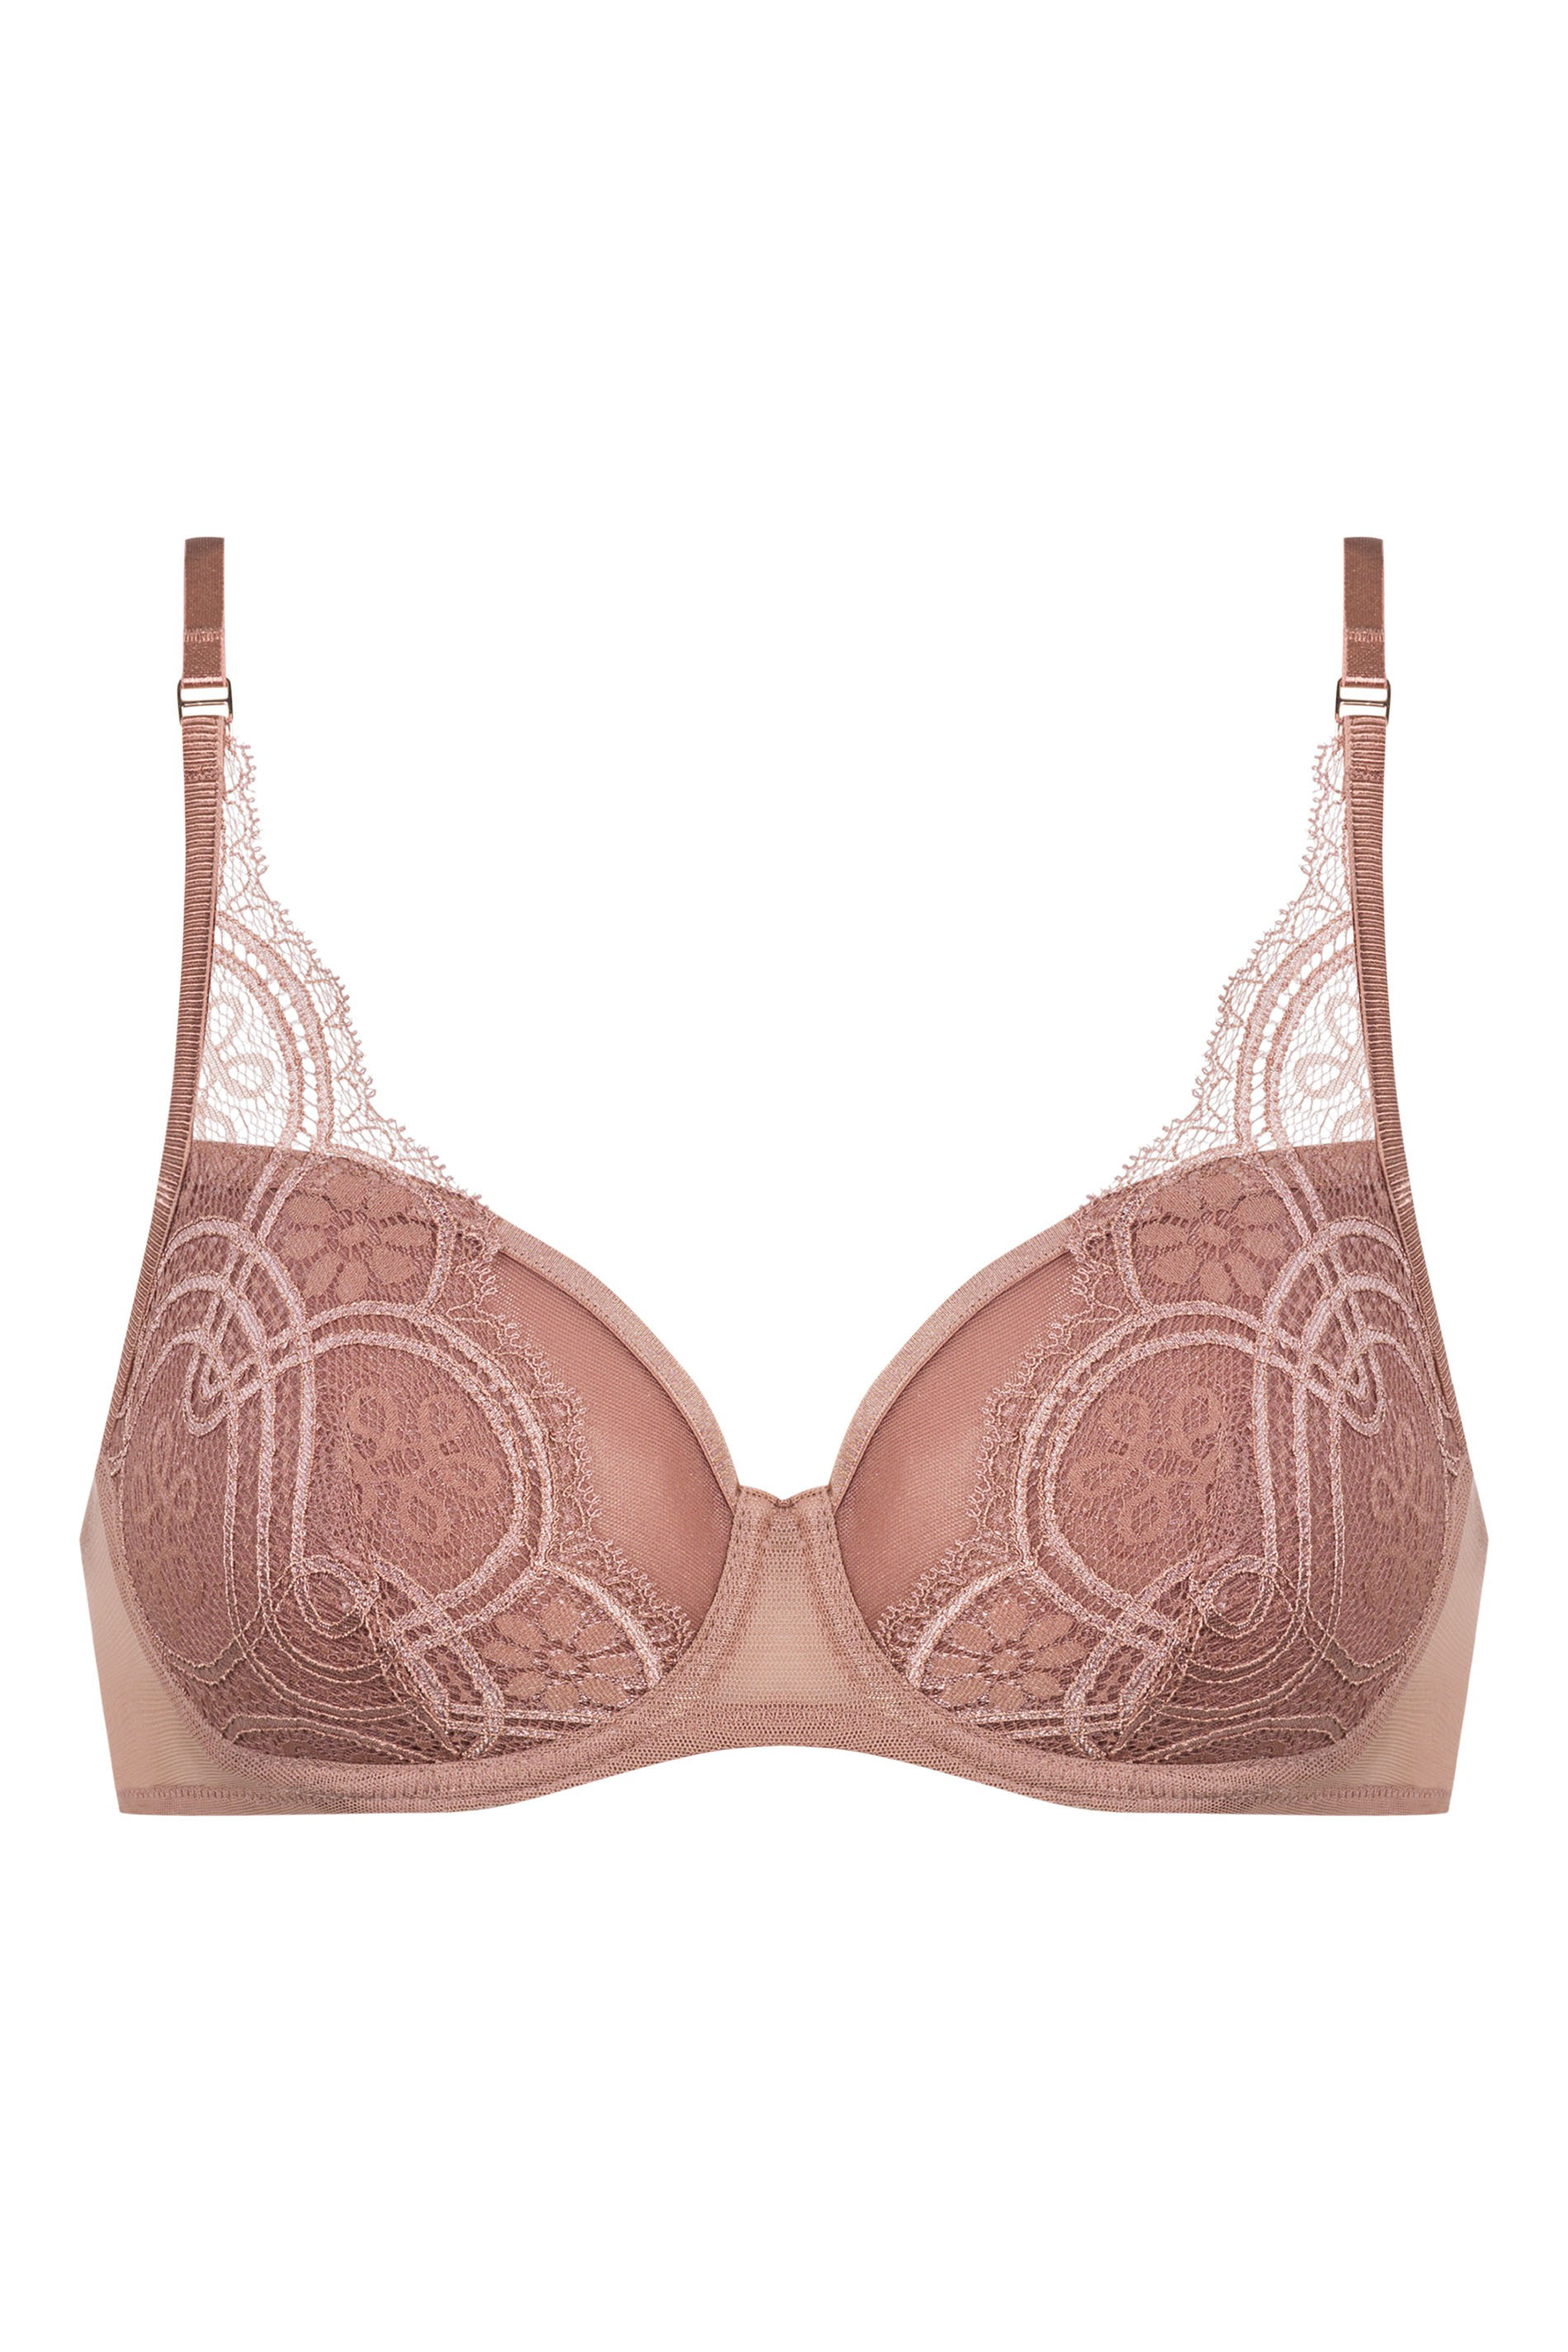 Spacer bra, Half Cup Serie Stunning Colour brown